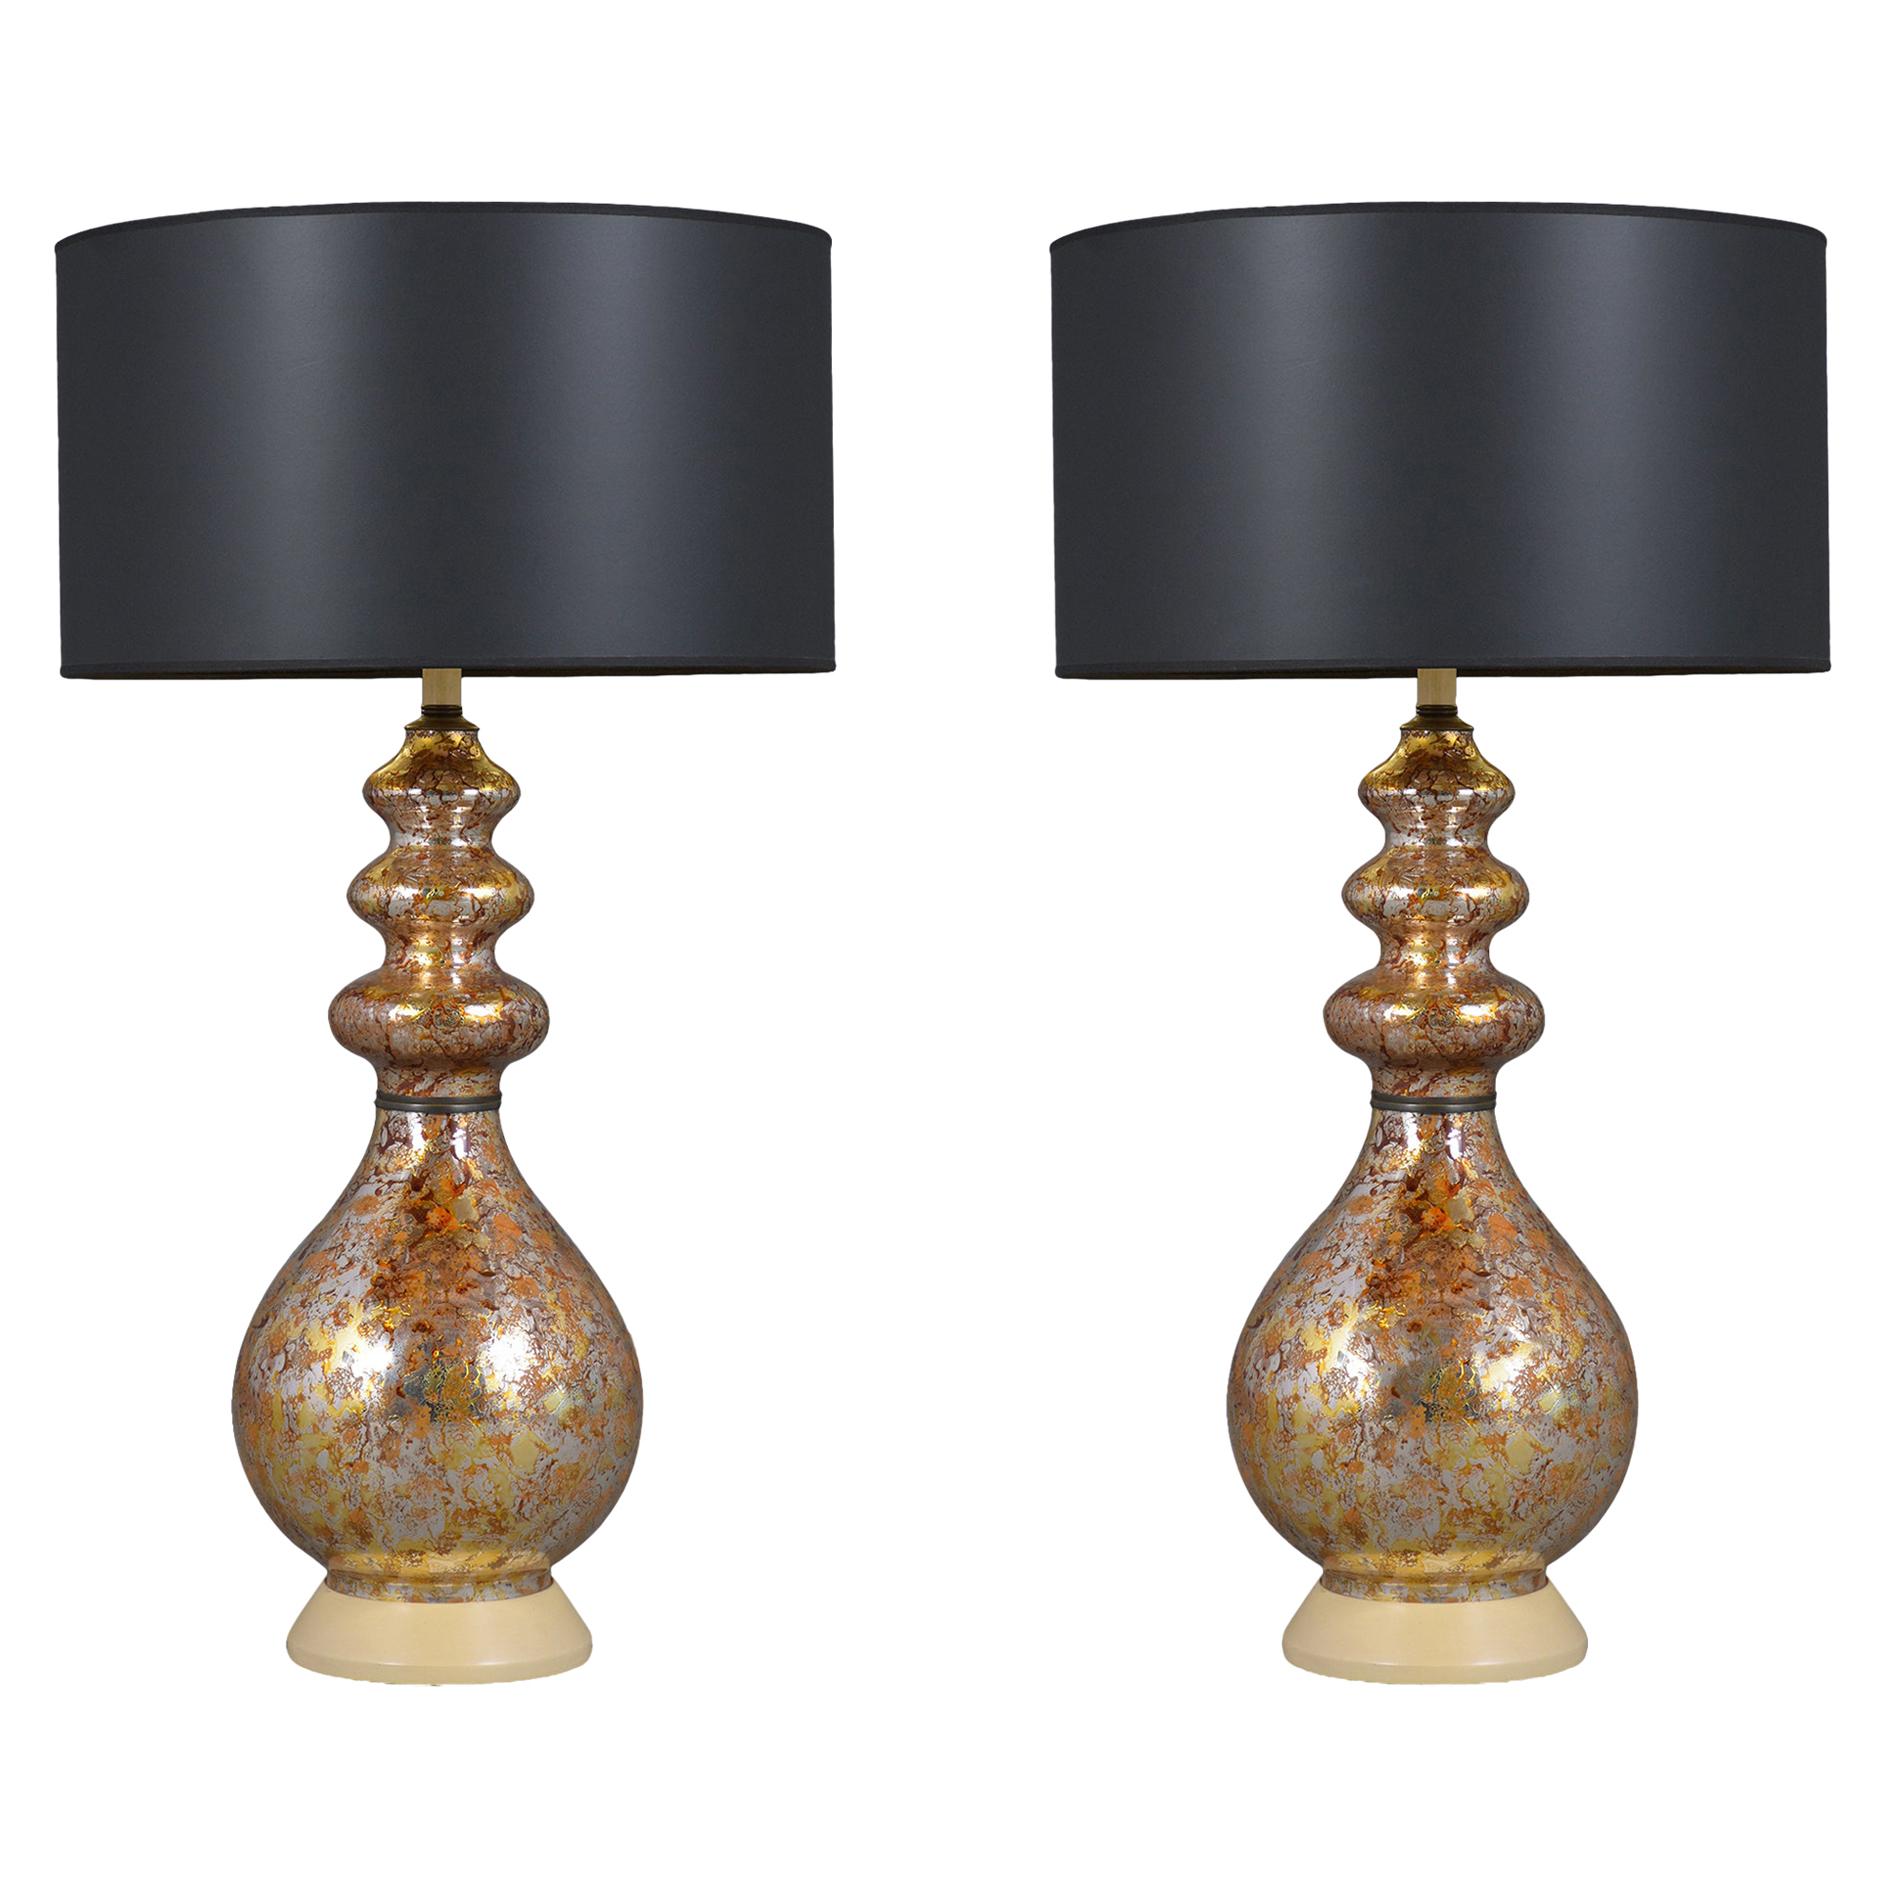 Pair of Modern Glass Table Lamps with Black & Gilt Shades - Vintage Elegance For Sale